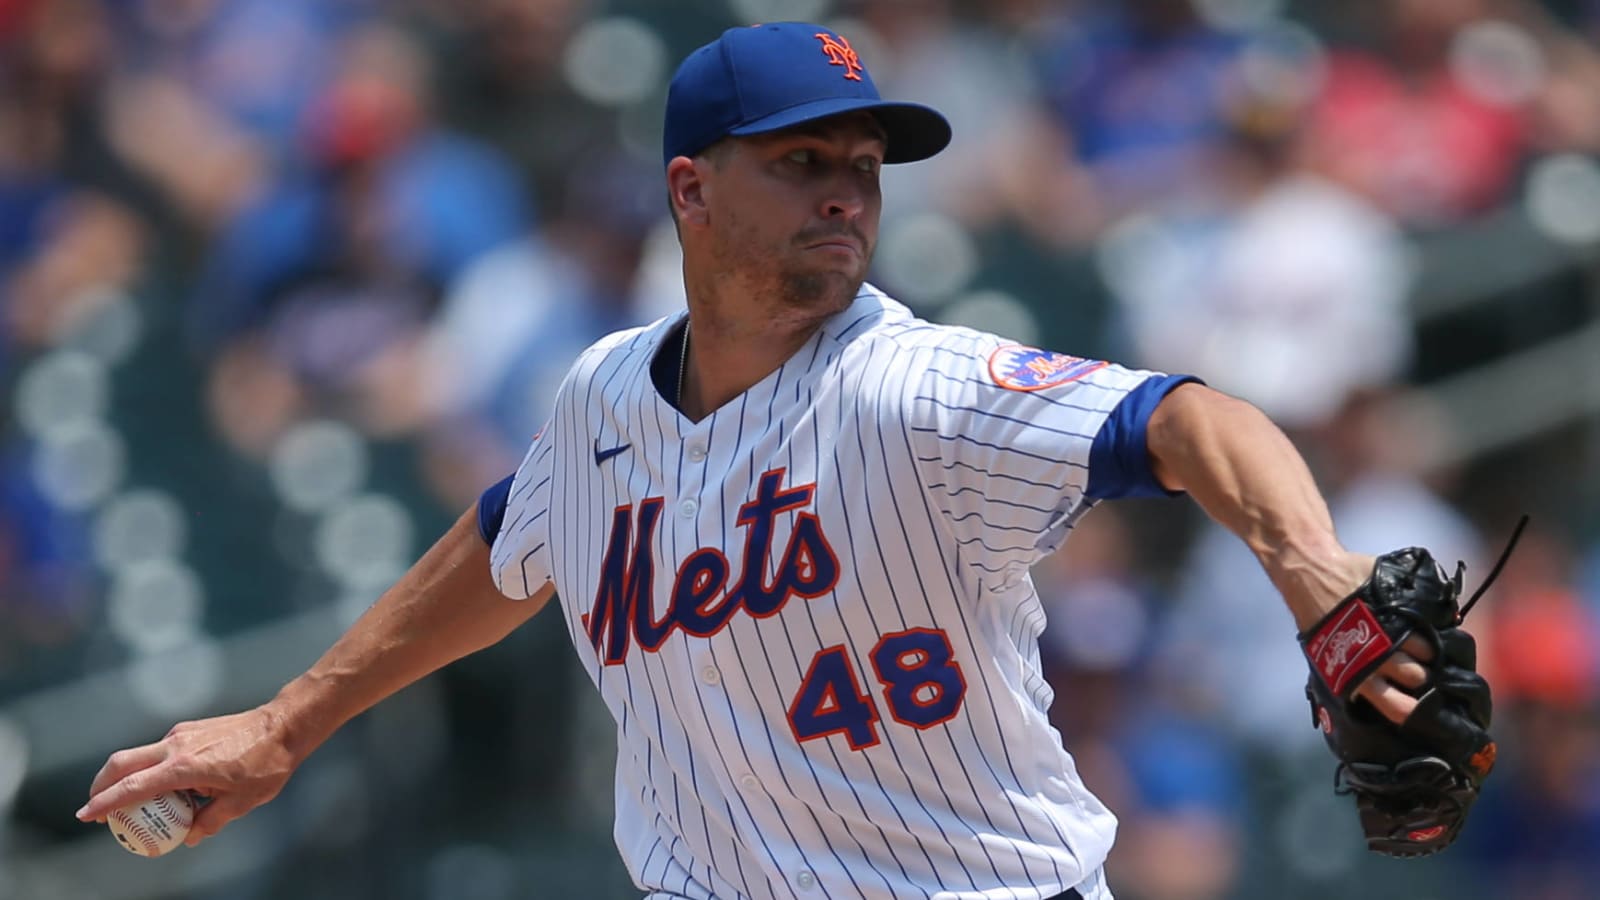 Jacob deGrom shut down at least two more weeks